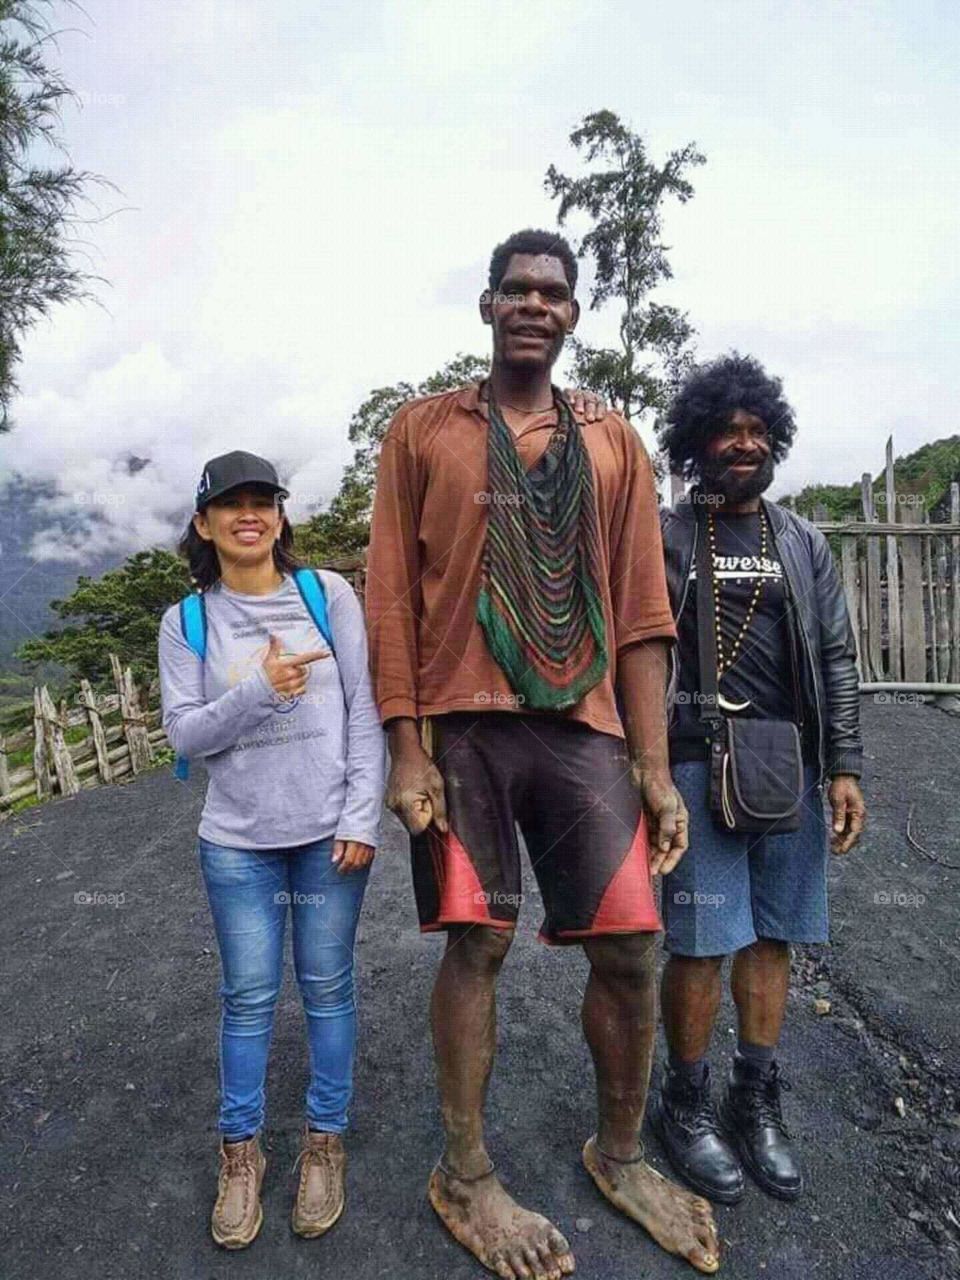 The highest Papuan people in the world